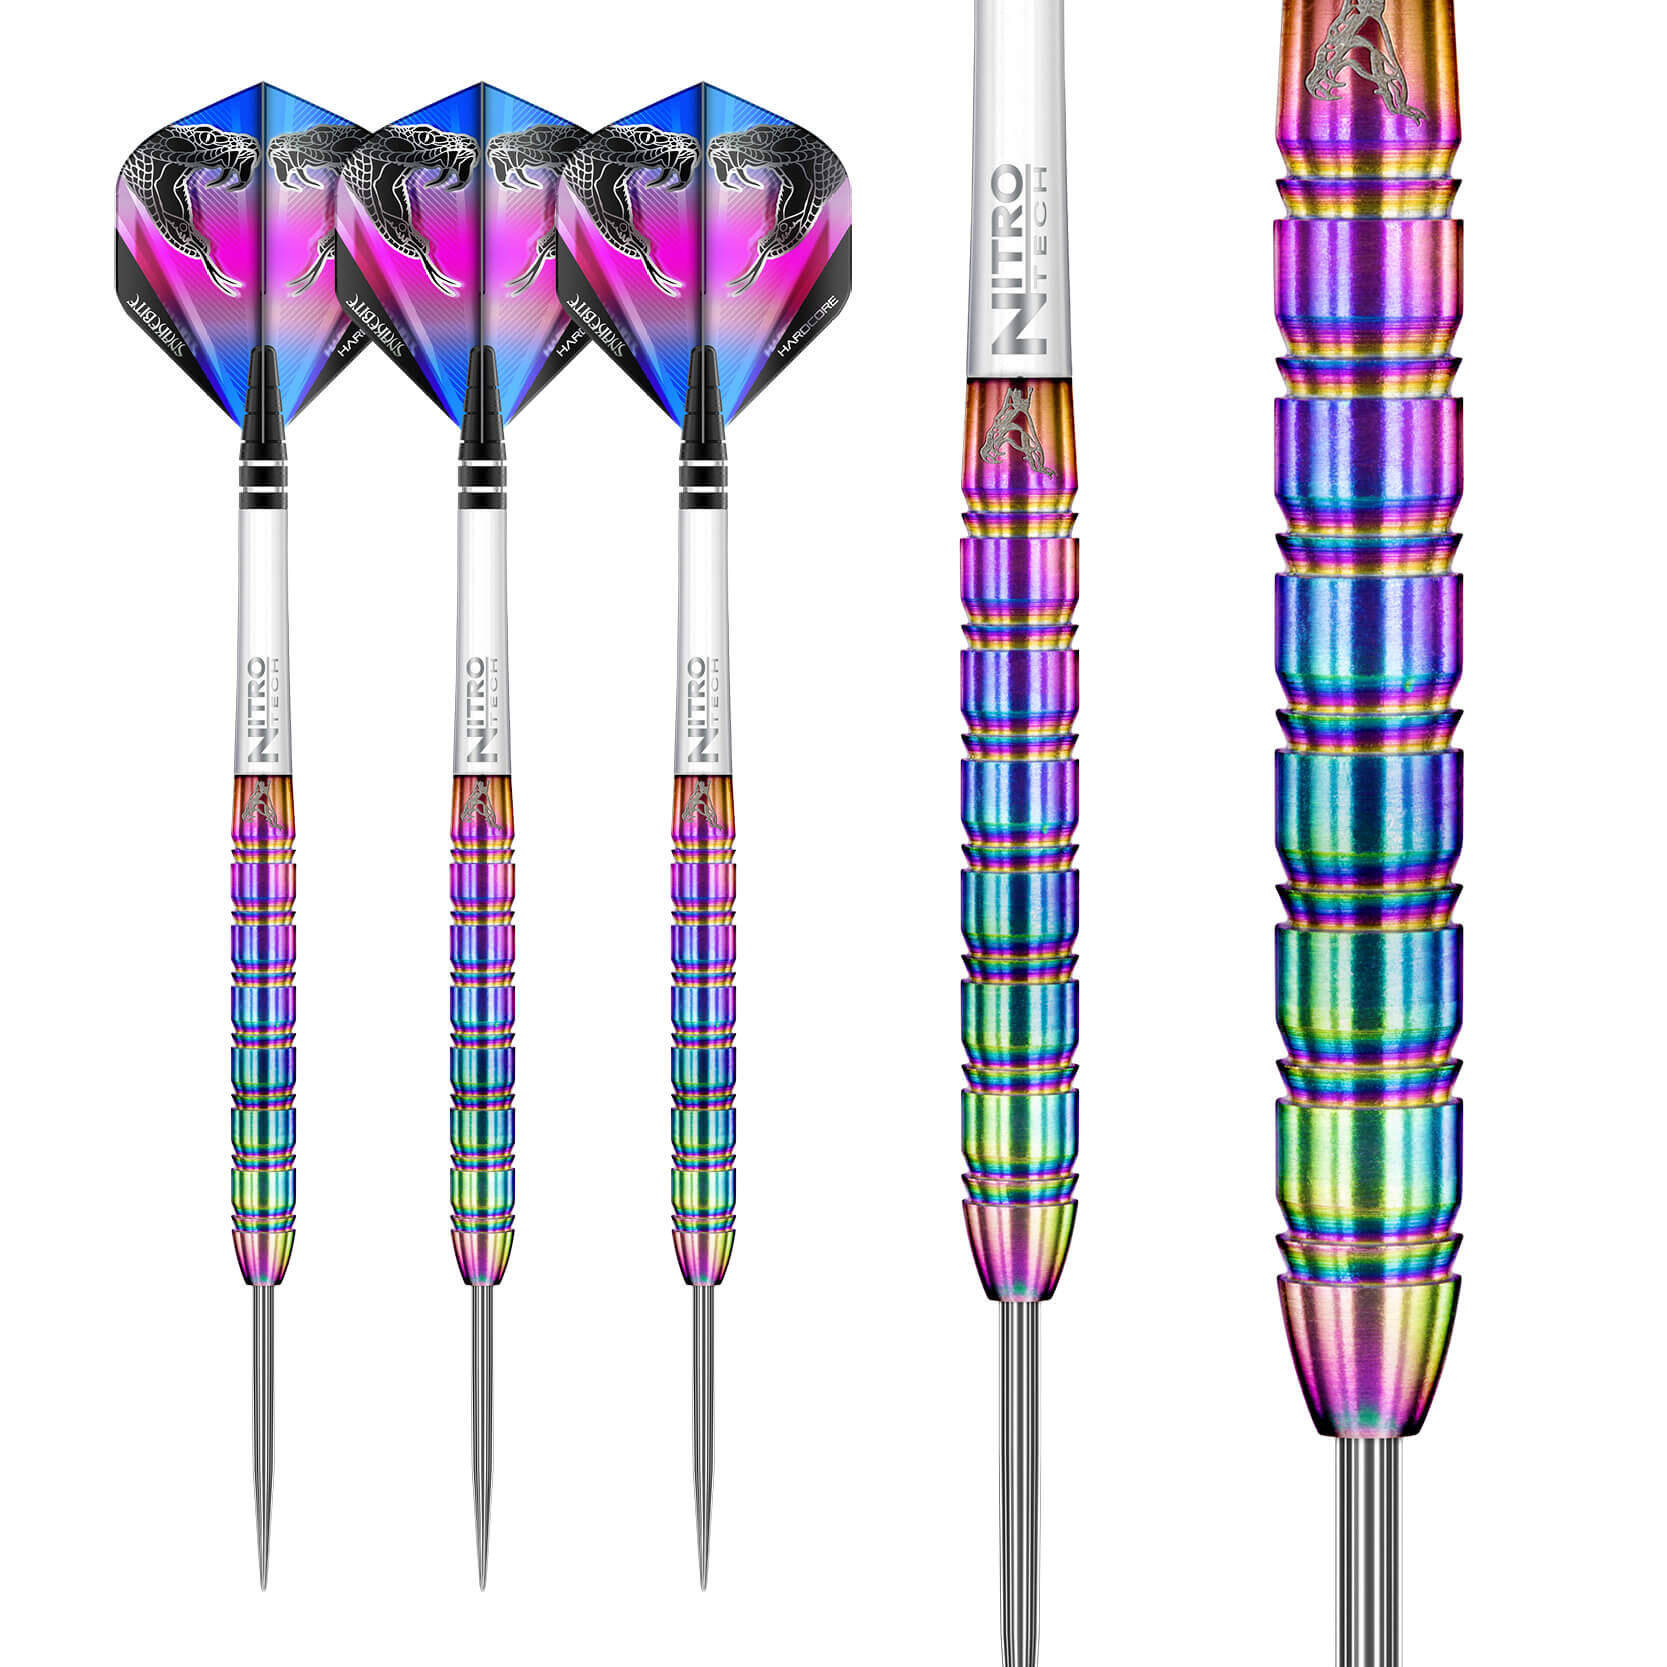 Peter Wright Snakebite 1: 24g Tungsten Darts Set with Flights and Stems 4/5